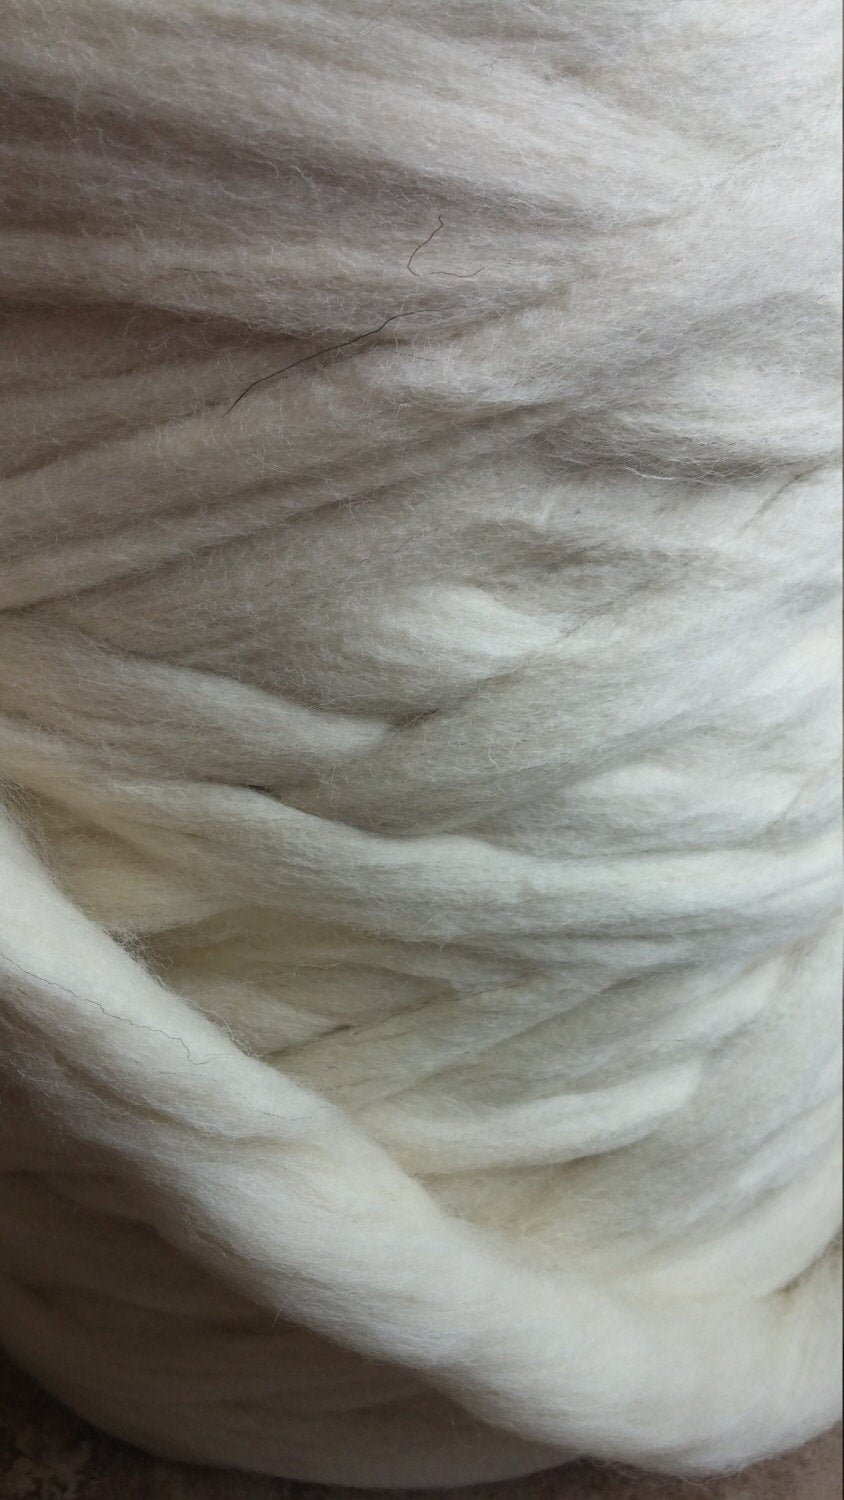 Spin Roving, Shep's Natural White Wool, Wool Top, Roving, Fiber, Spin Fiber, Wool Rove, Spinning Wool, Wool For Spinning into Yarn